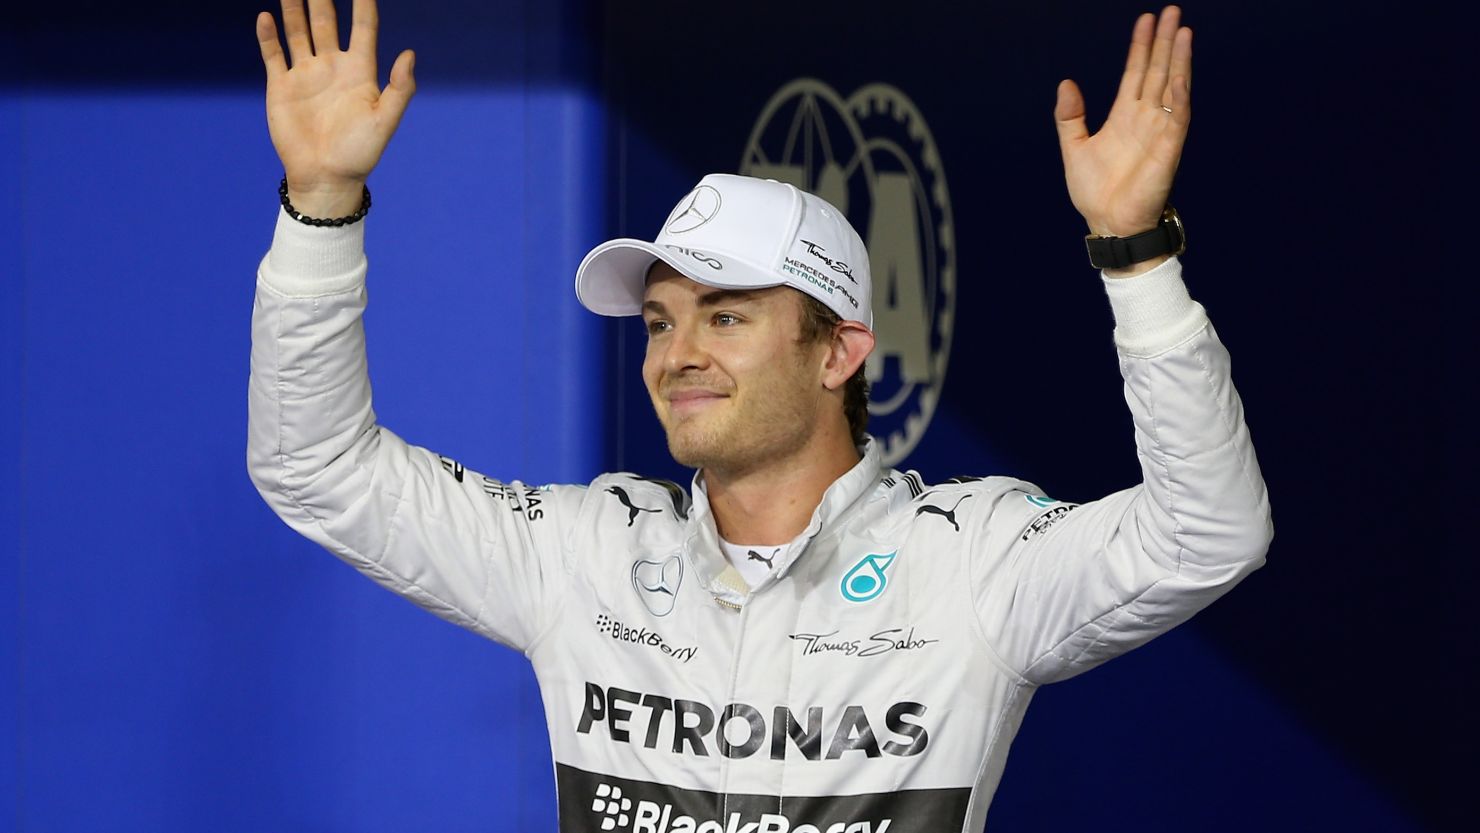 Nico Rosberg drew first blood by snatching pole in the crucial Abu Dhabi F1 GP.